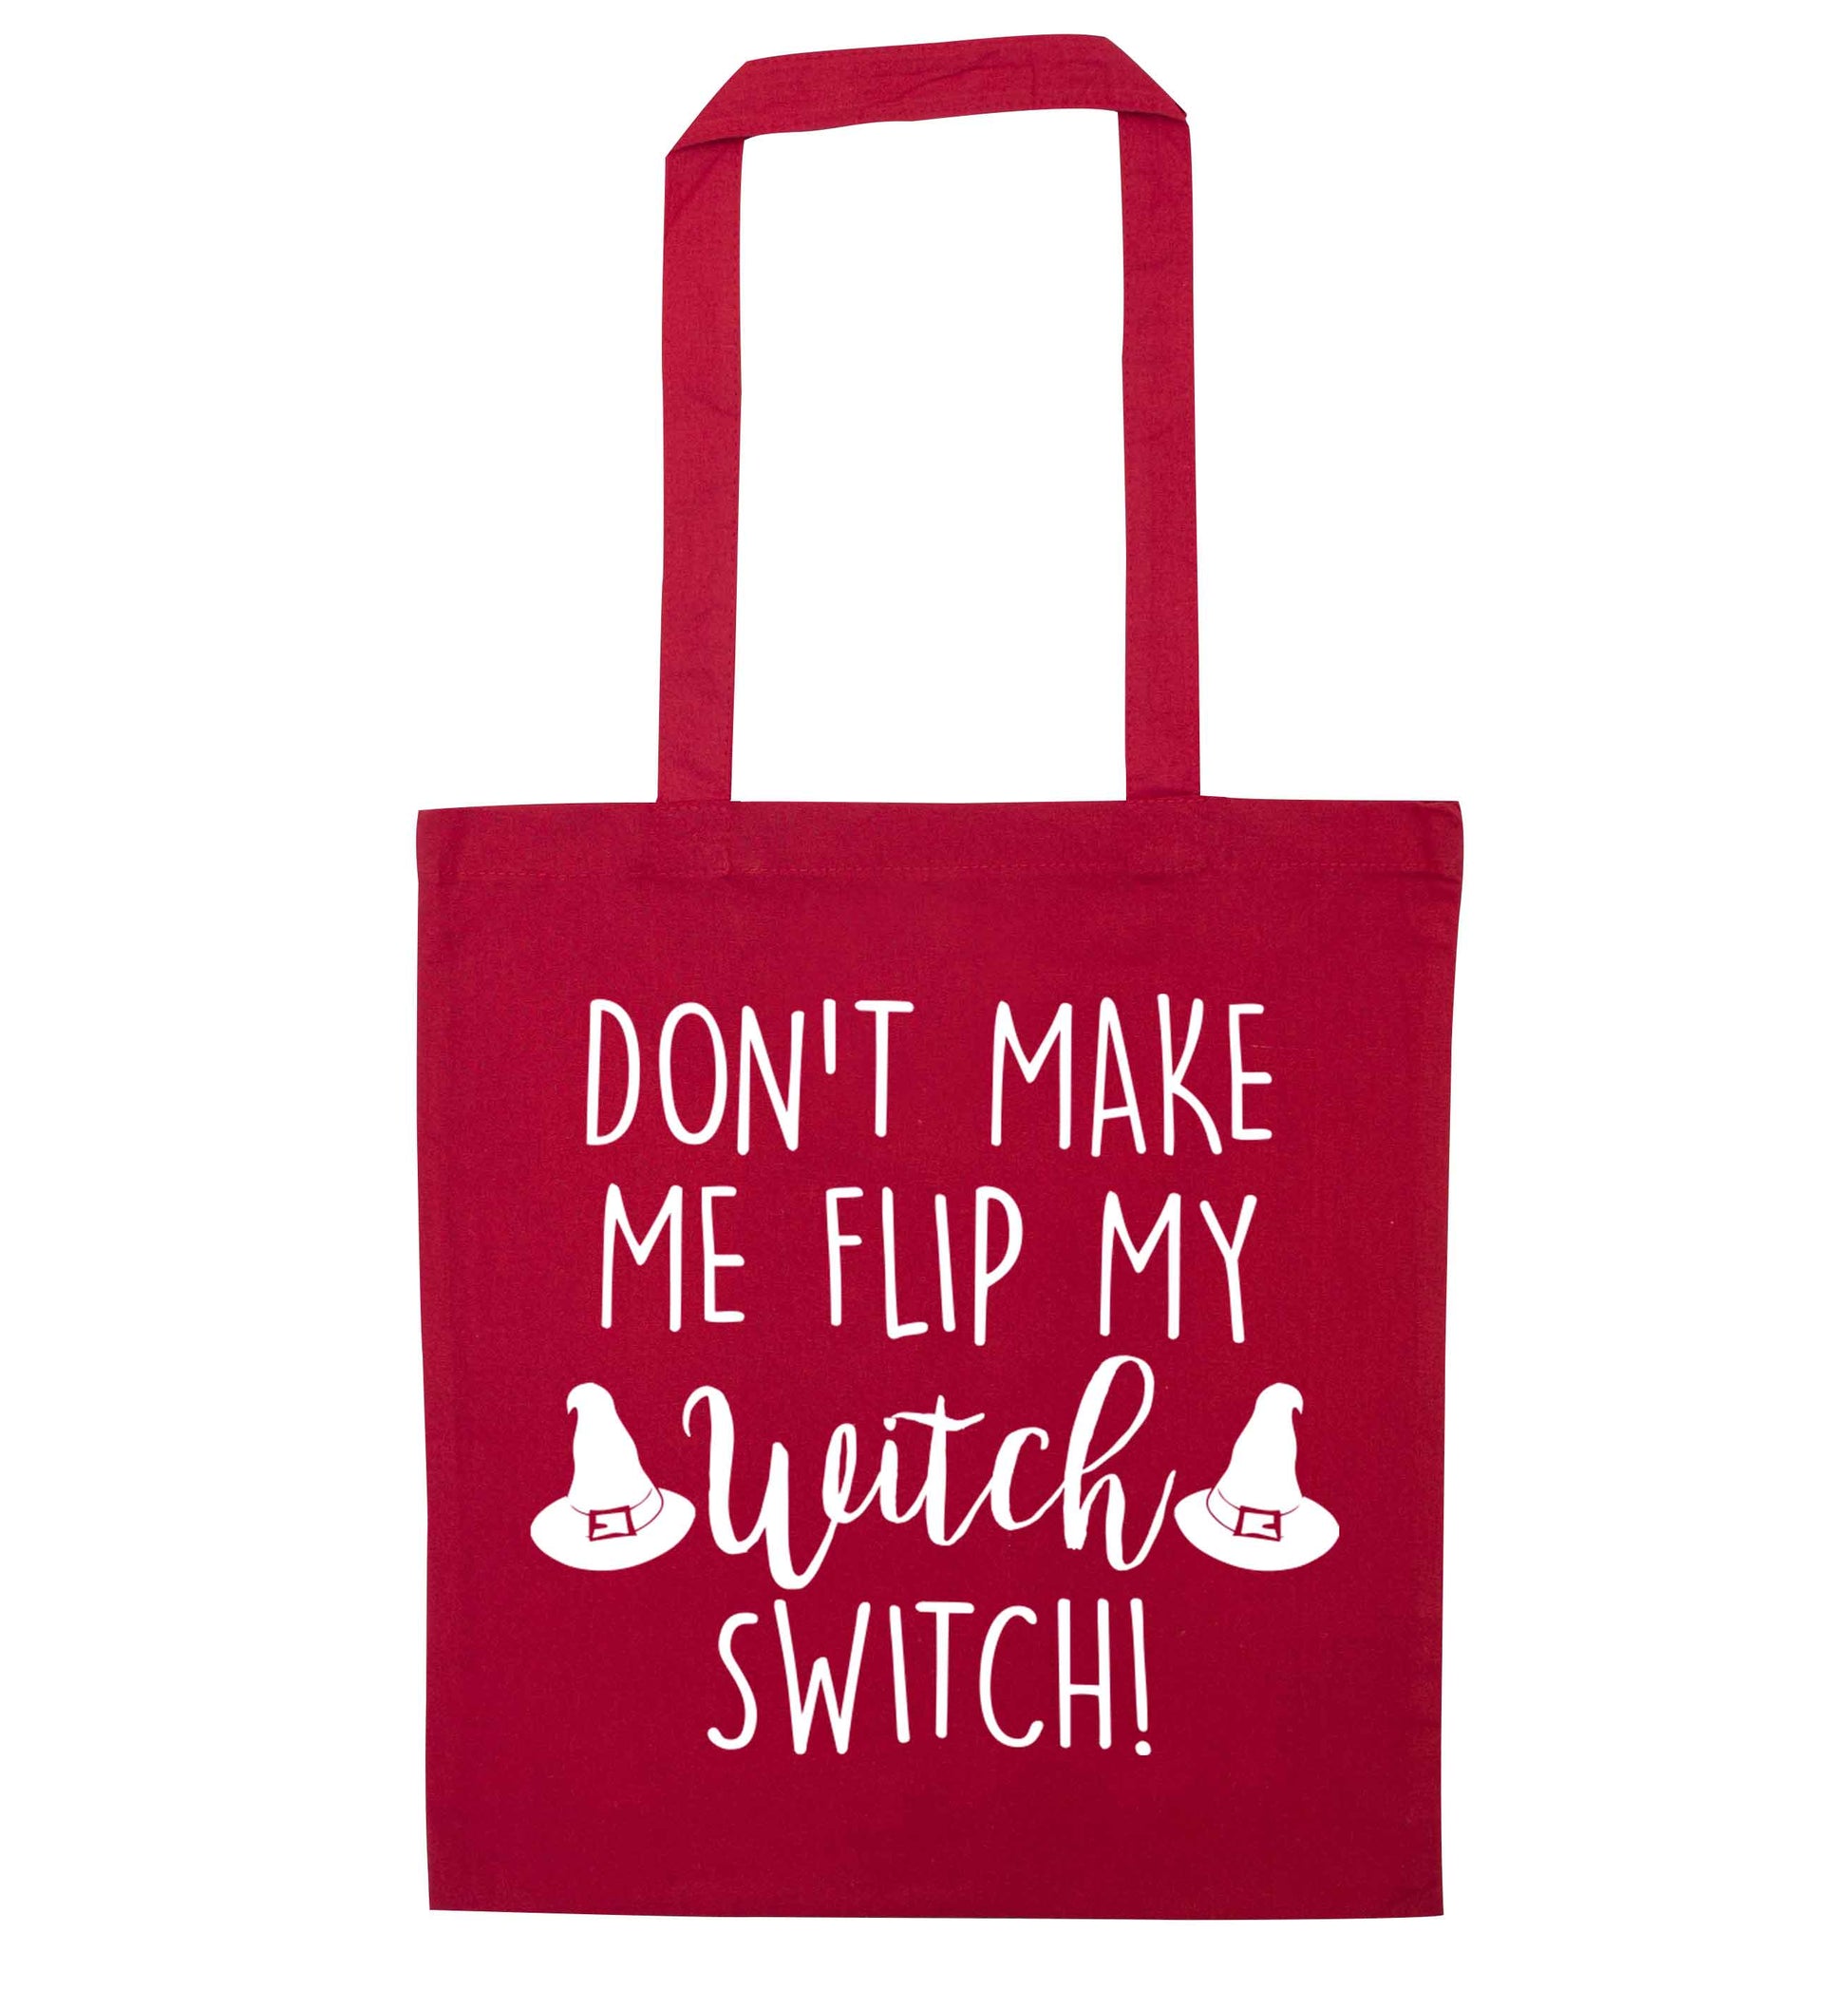 Don't make me flip my witch switch red tote bag